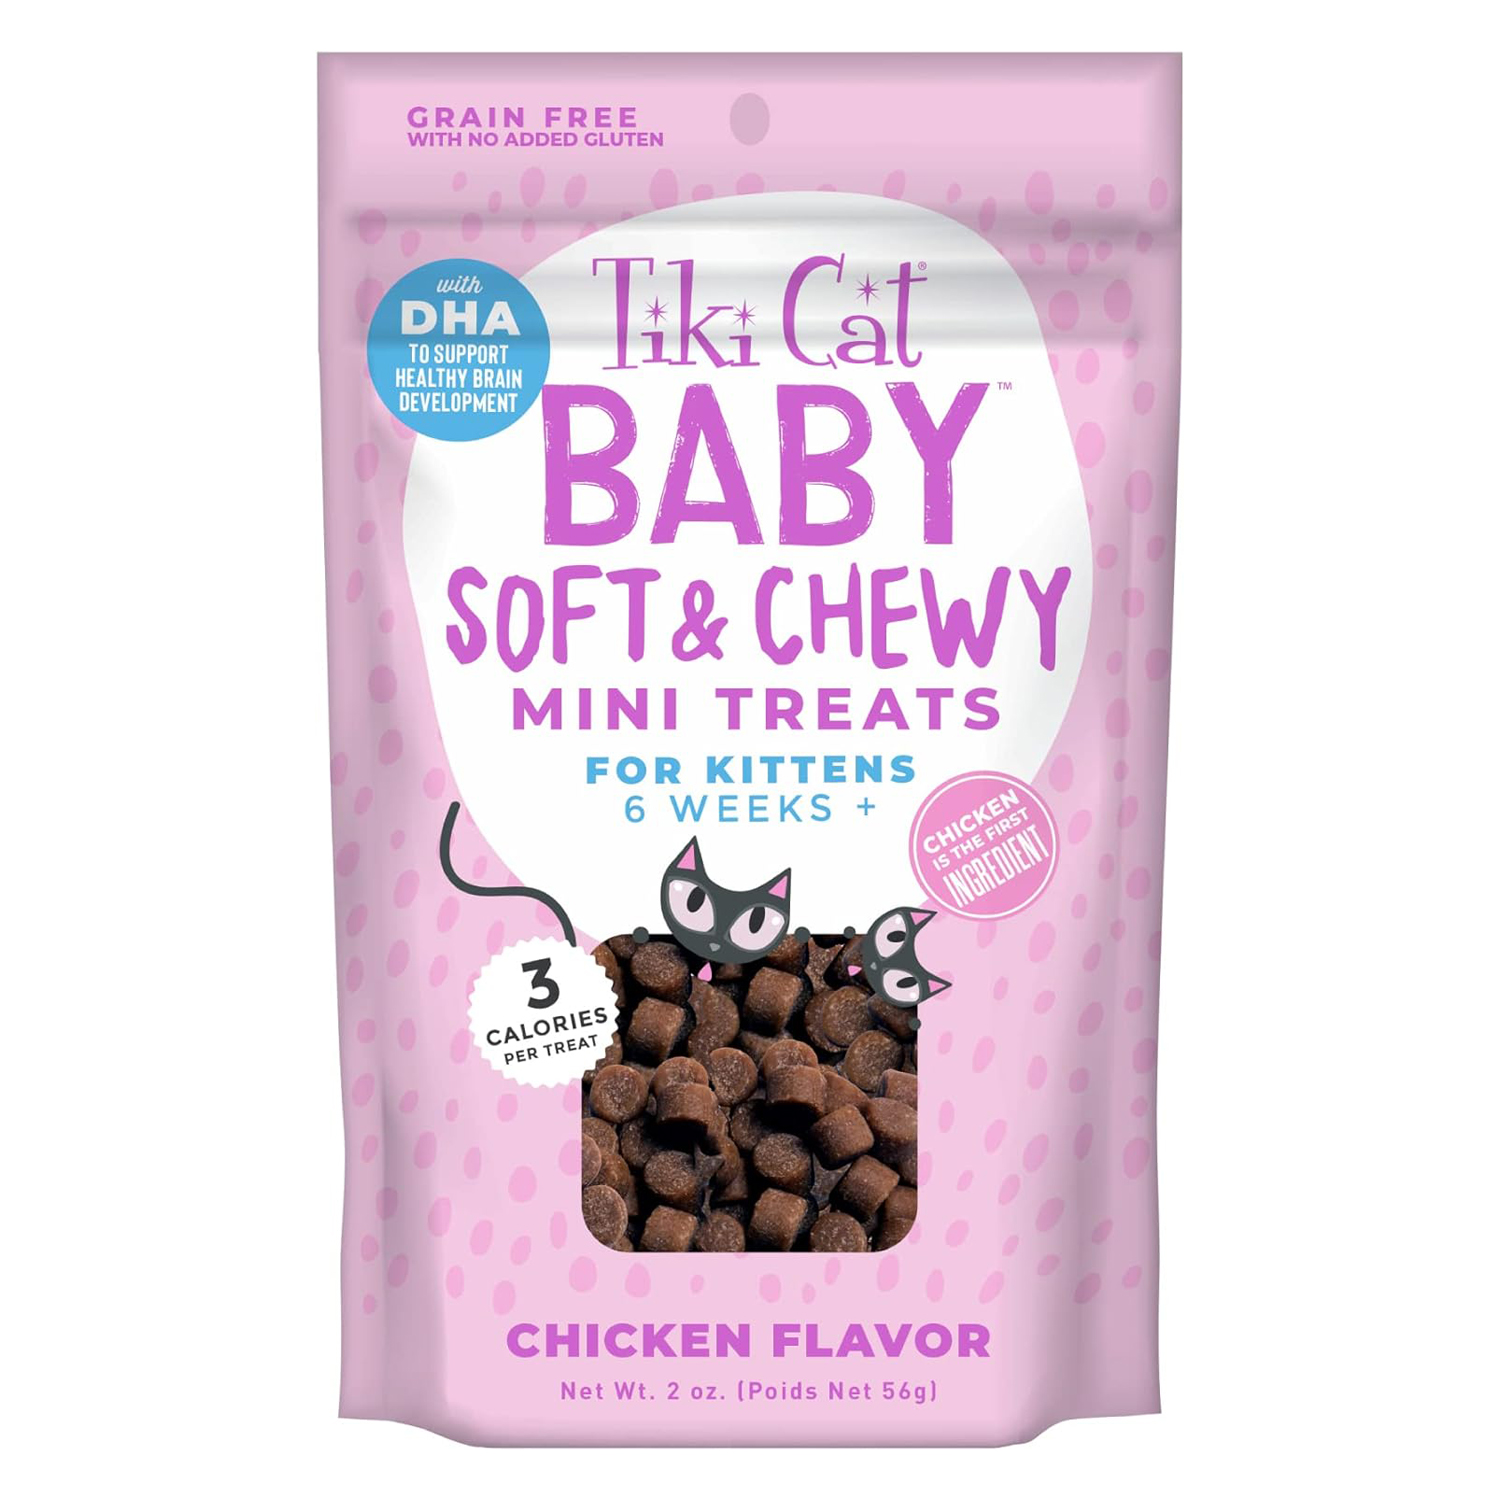 Tiki Cat Baby Soft & Chewy, Chicken Flavored, Low-Calorie, Mini Treats for Kittens